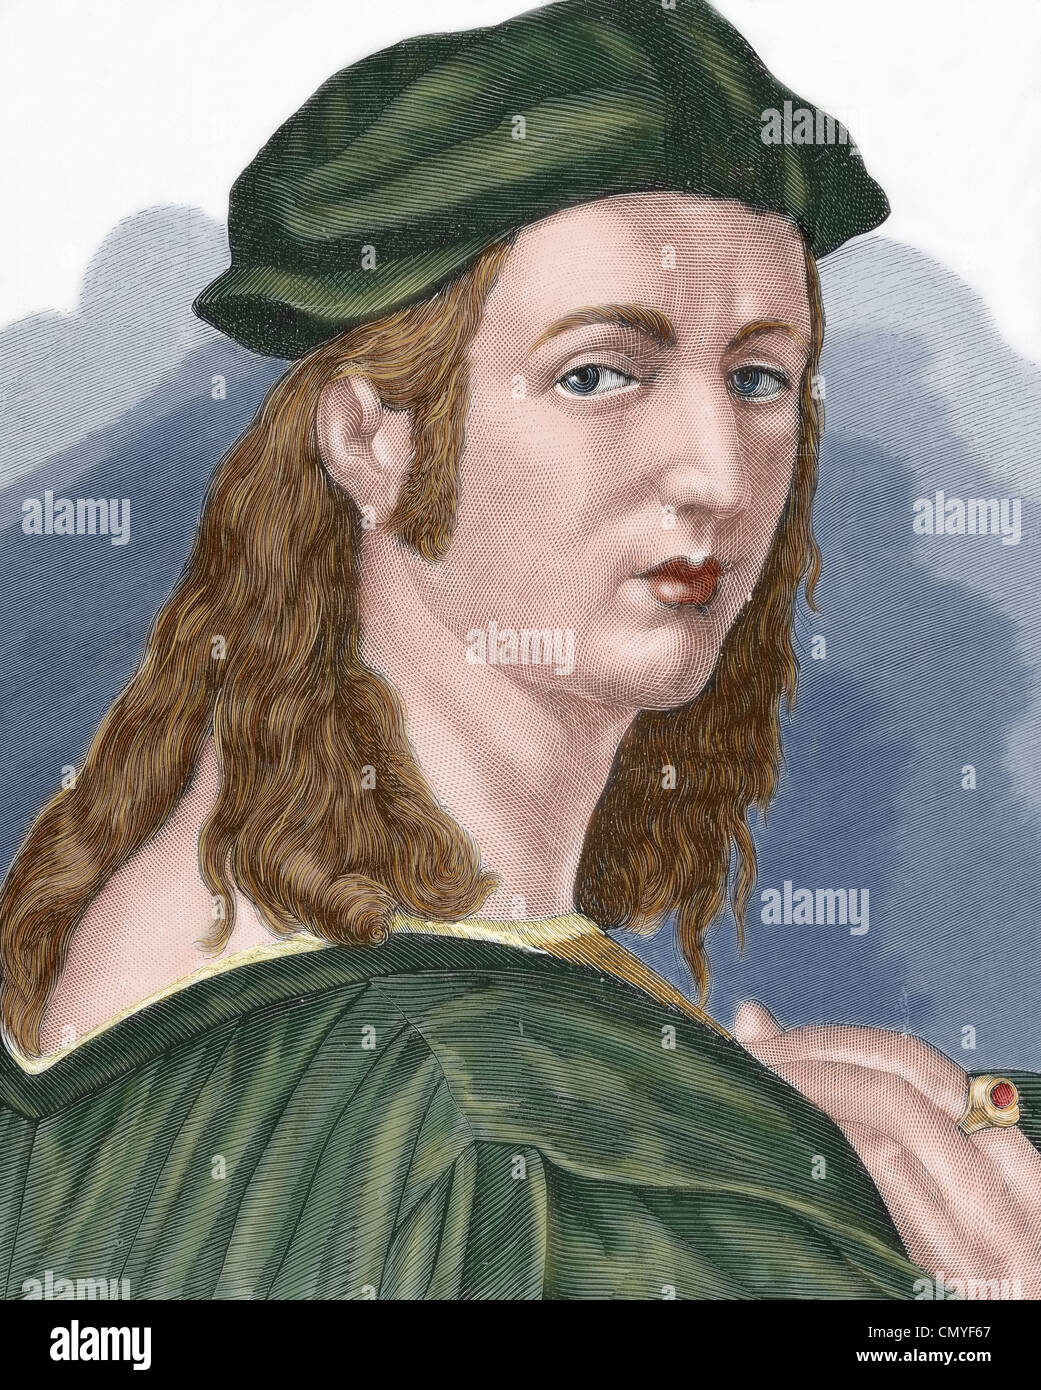 Raphael (1483-1520). Italian painter and architect of the High Renaissance. Portrait. Colored engraving. Stock Photo